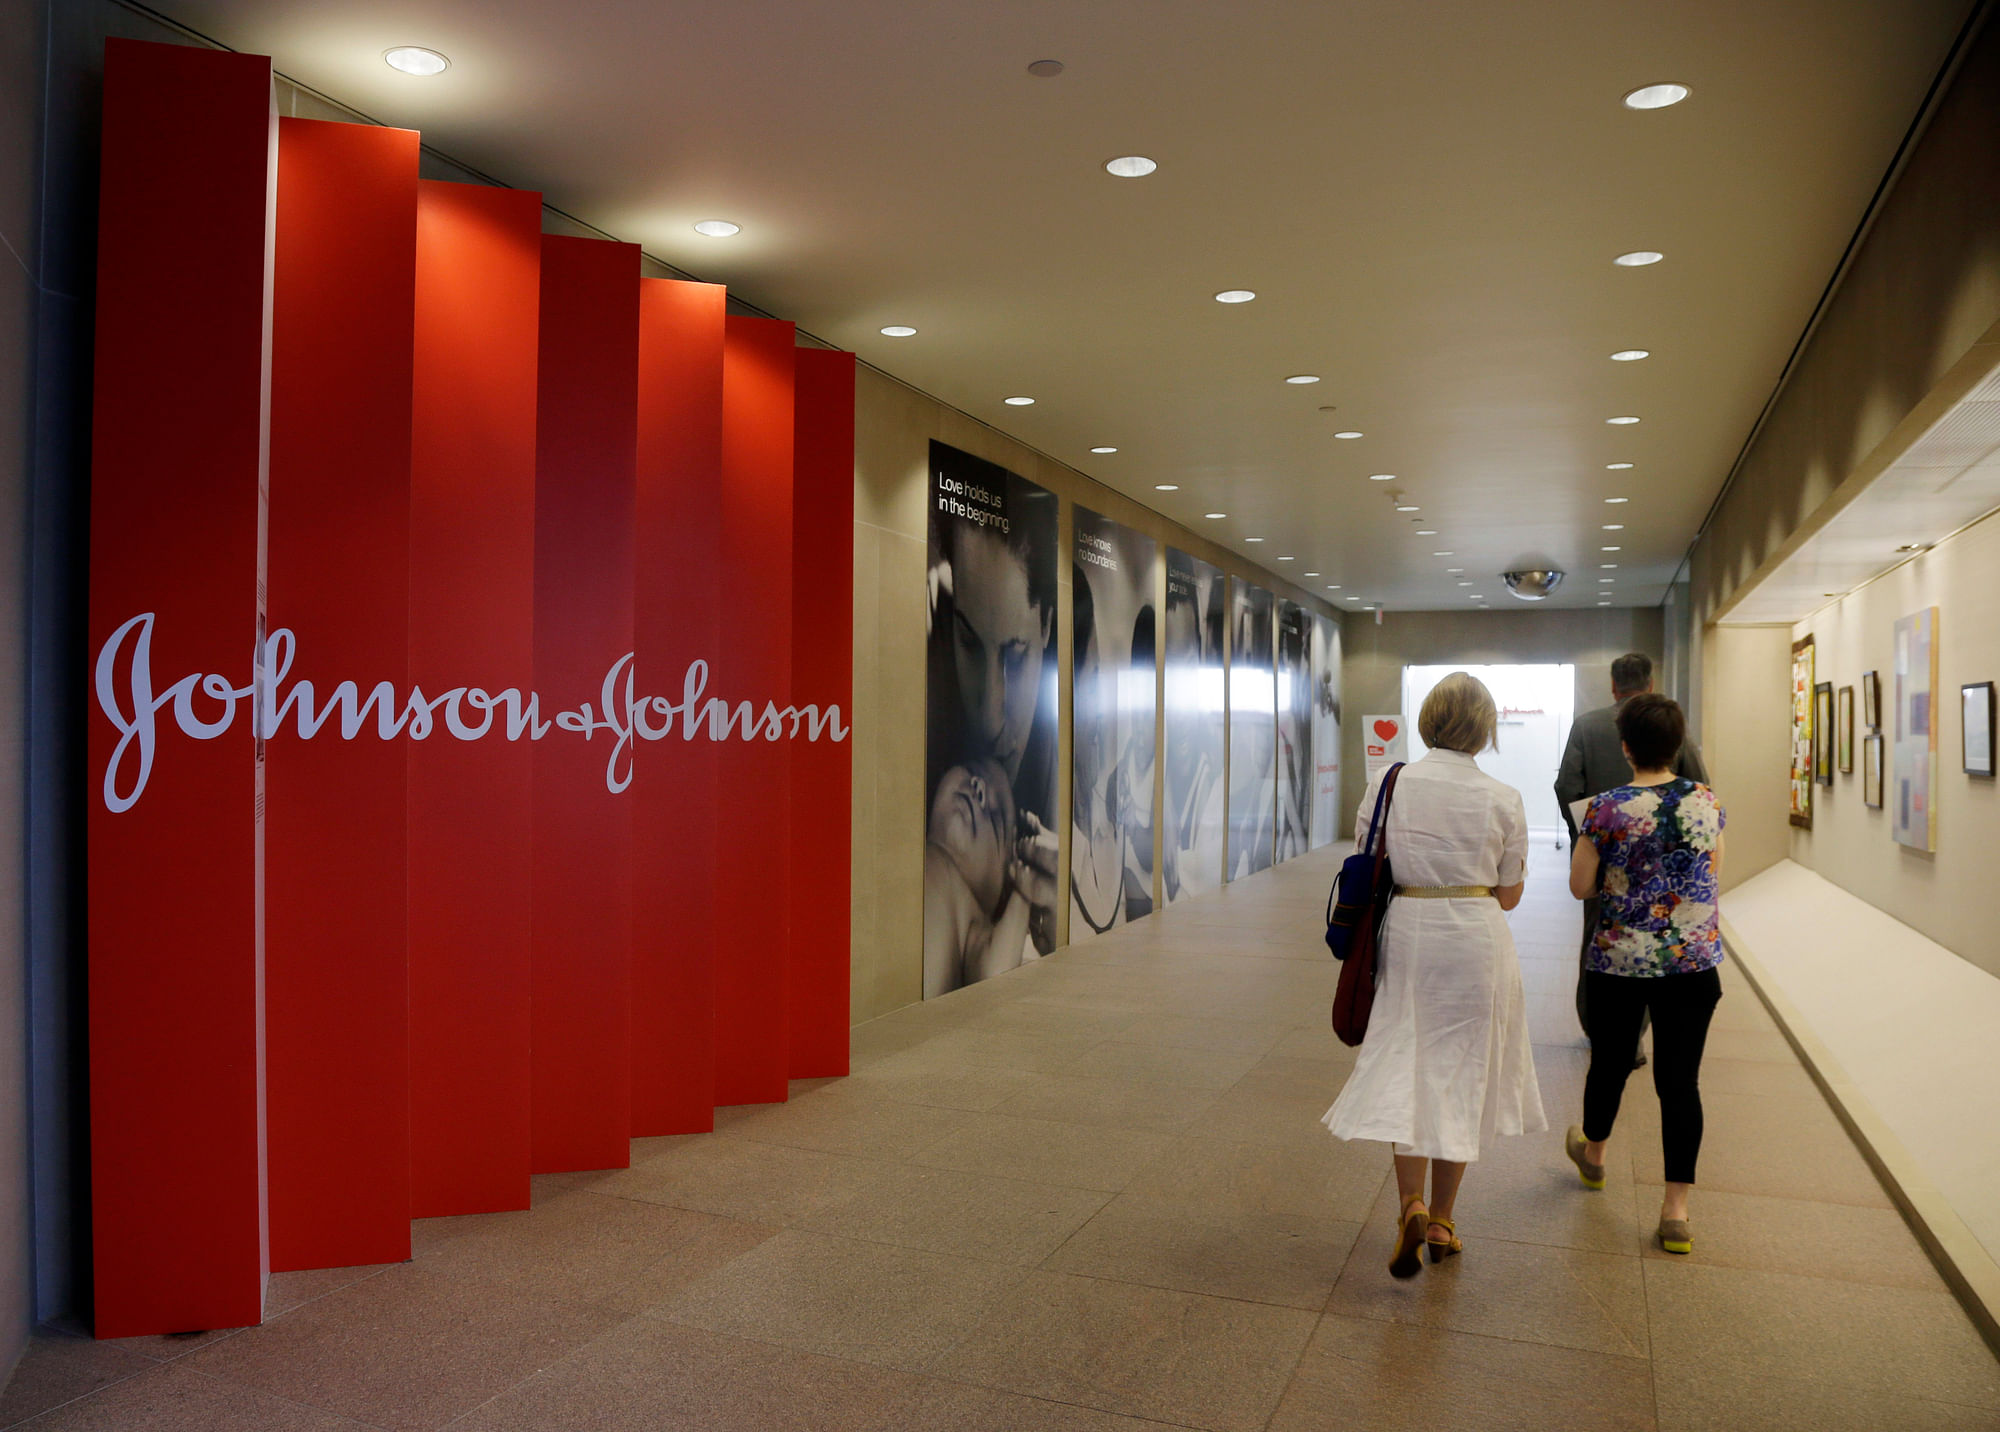 A Philadelphia jury has ruled that Johnson &amp; Johnson and Janssen Pharmaceuticals must pay $8 billion in punitive damages over an antipsychotic drug linked to the abnormal growth of female breast tissue in boys.